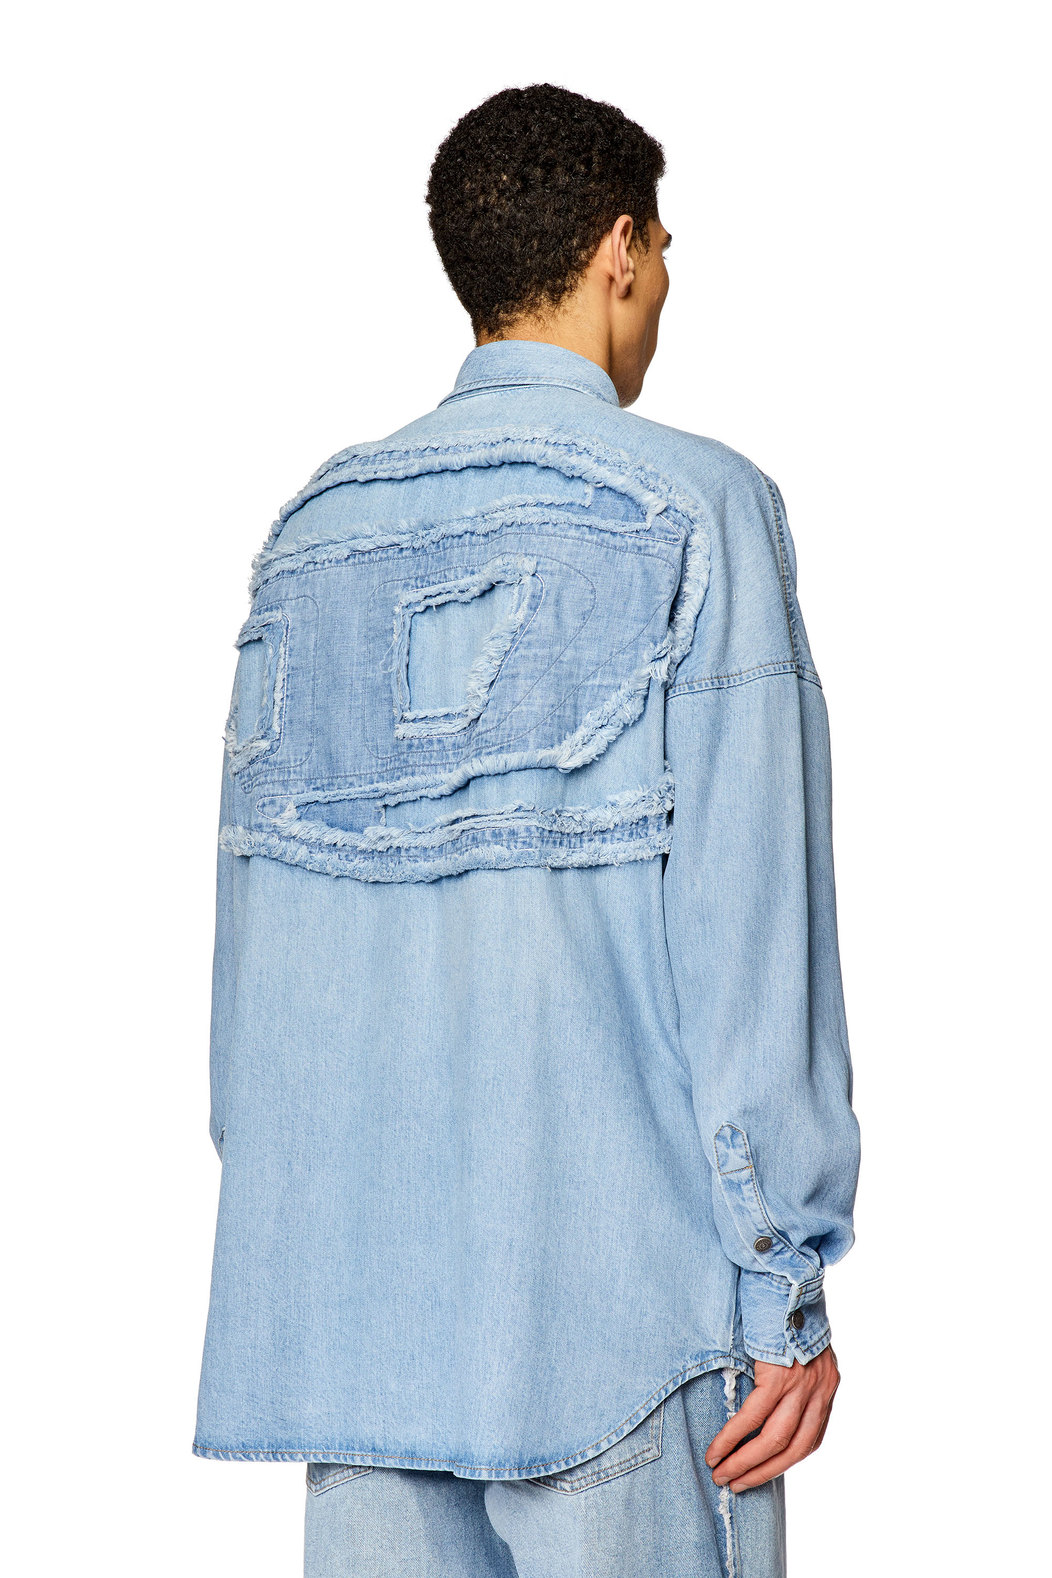 Shirt in denim with distressed logo